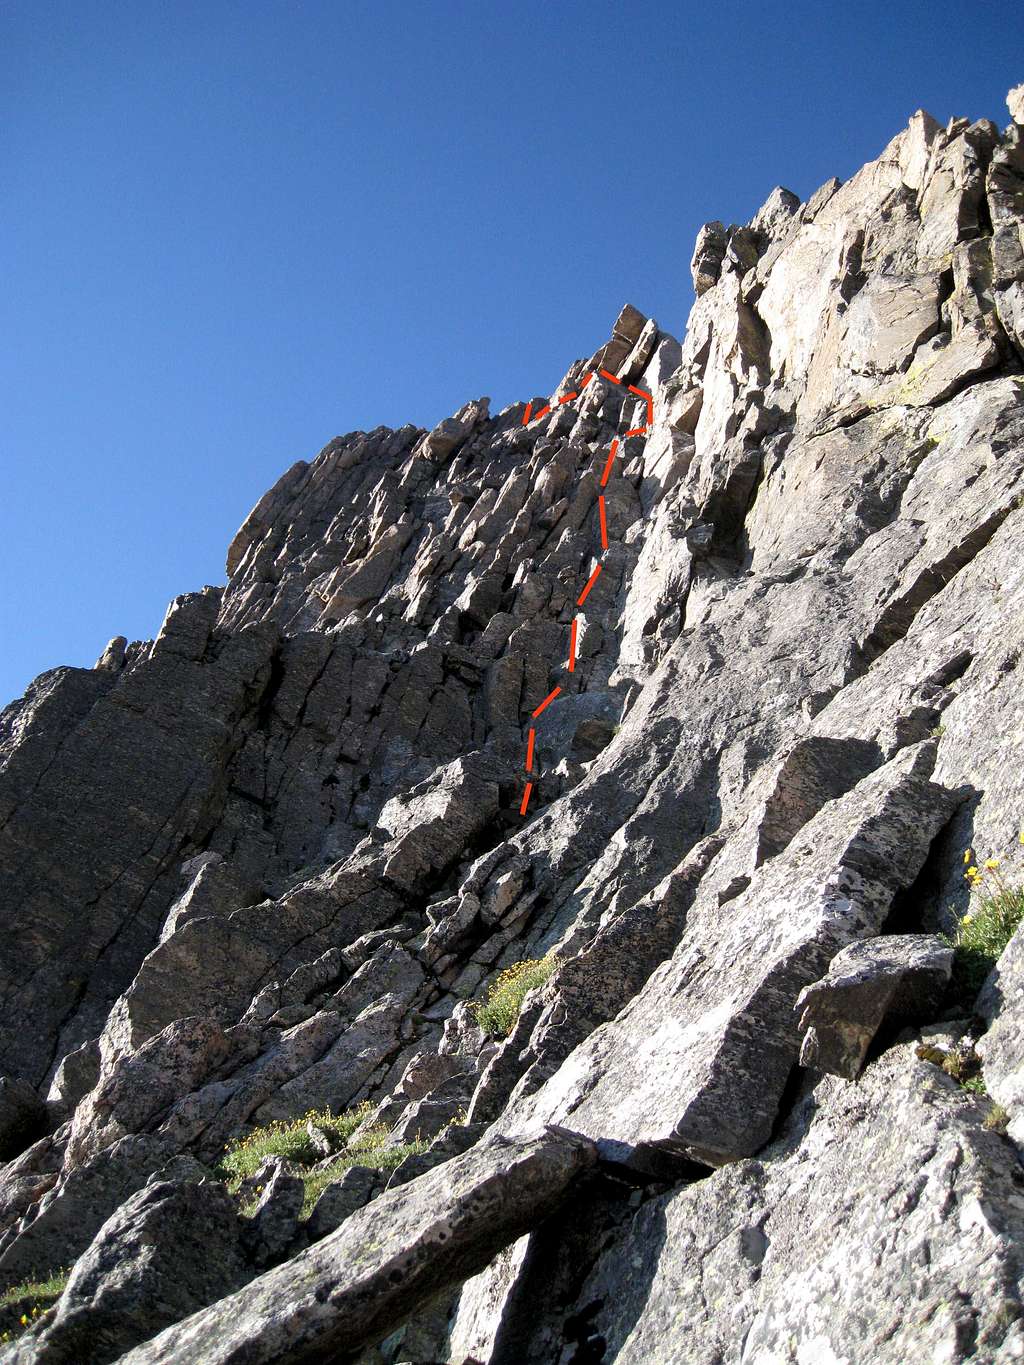 The route on the Second Tower